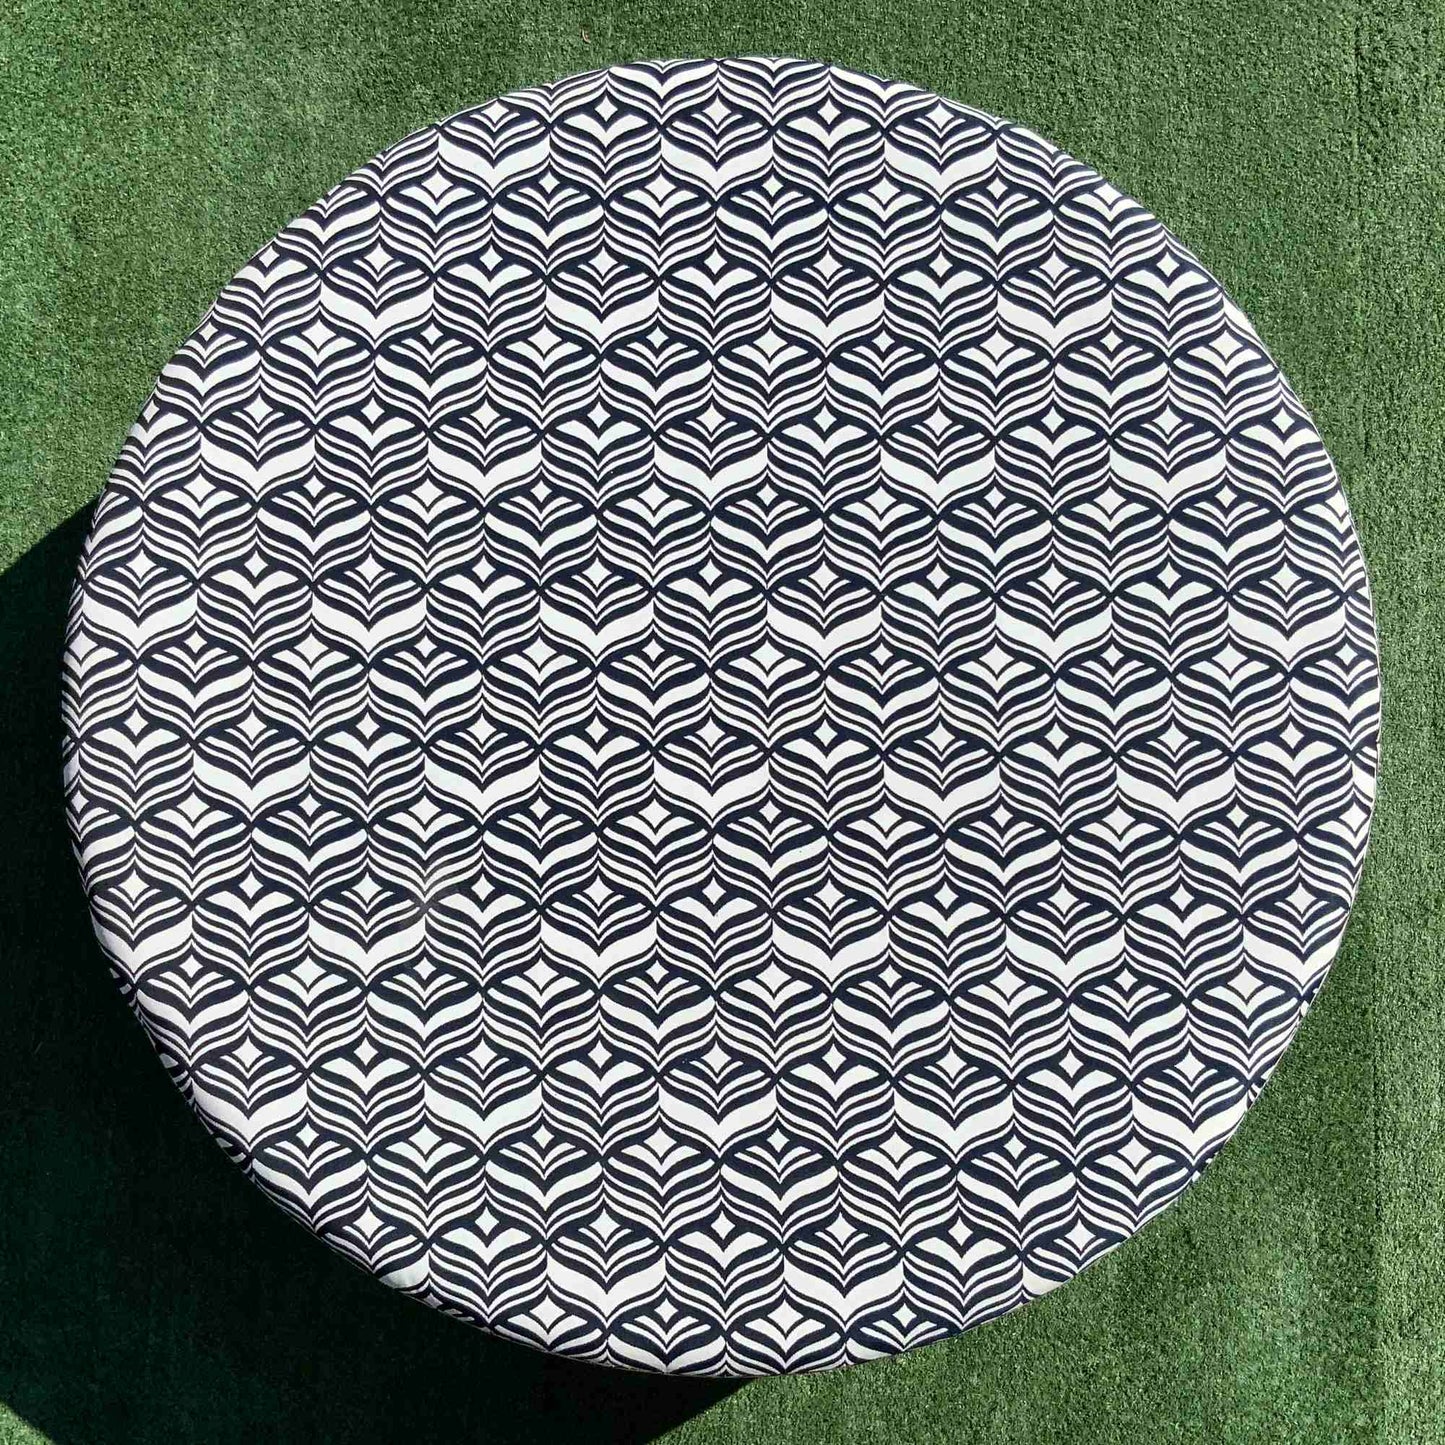 OUTDOOR ROUND OTTOMAN | ALL WEATHER OUTDOORS FABRIC | MULTIPLE OPTIONS AVAILABLE | MADE TO ORDER IN WA